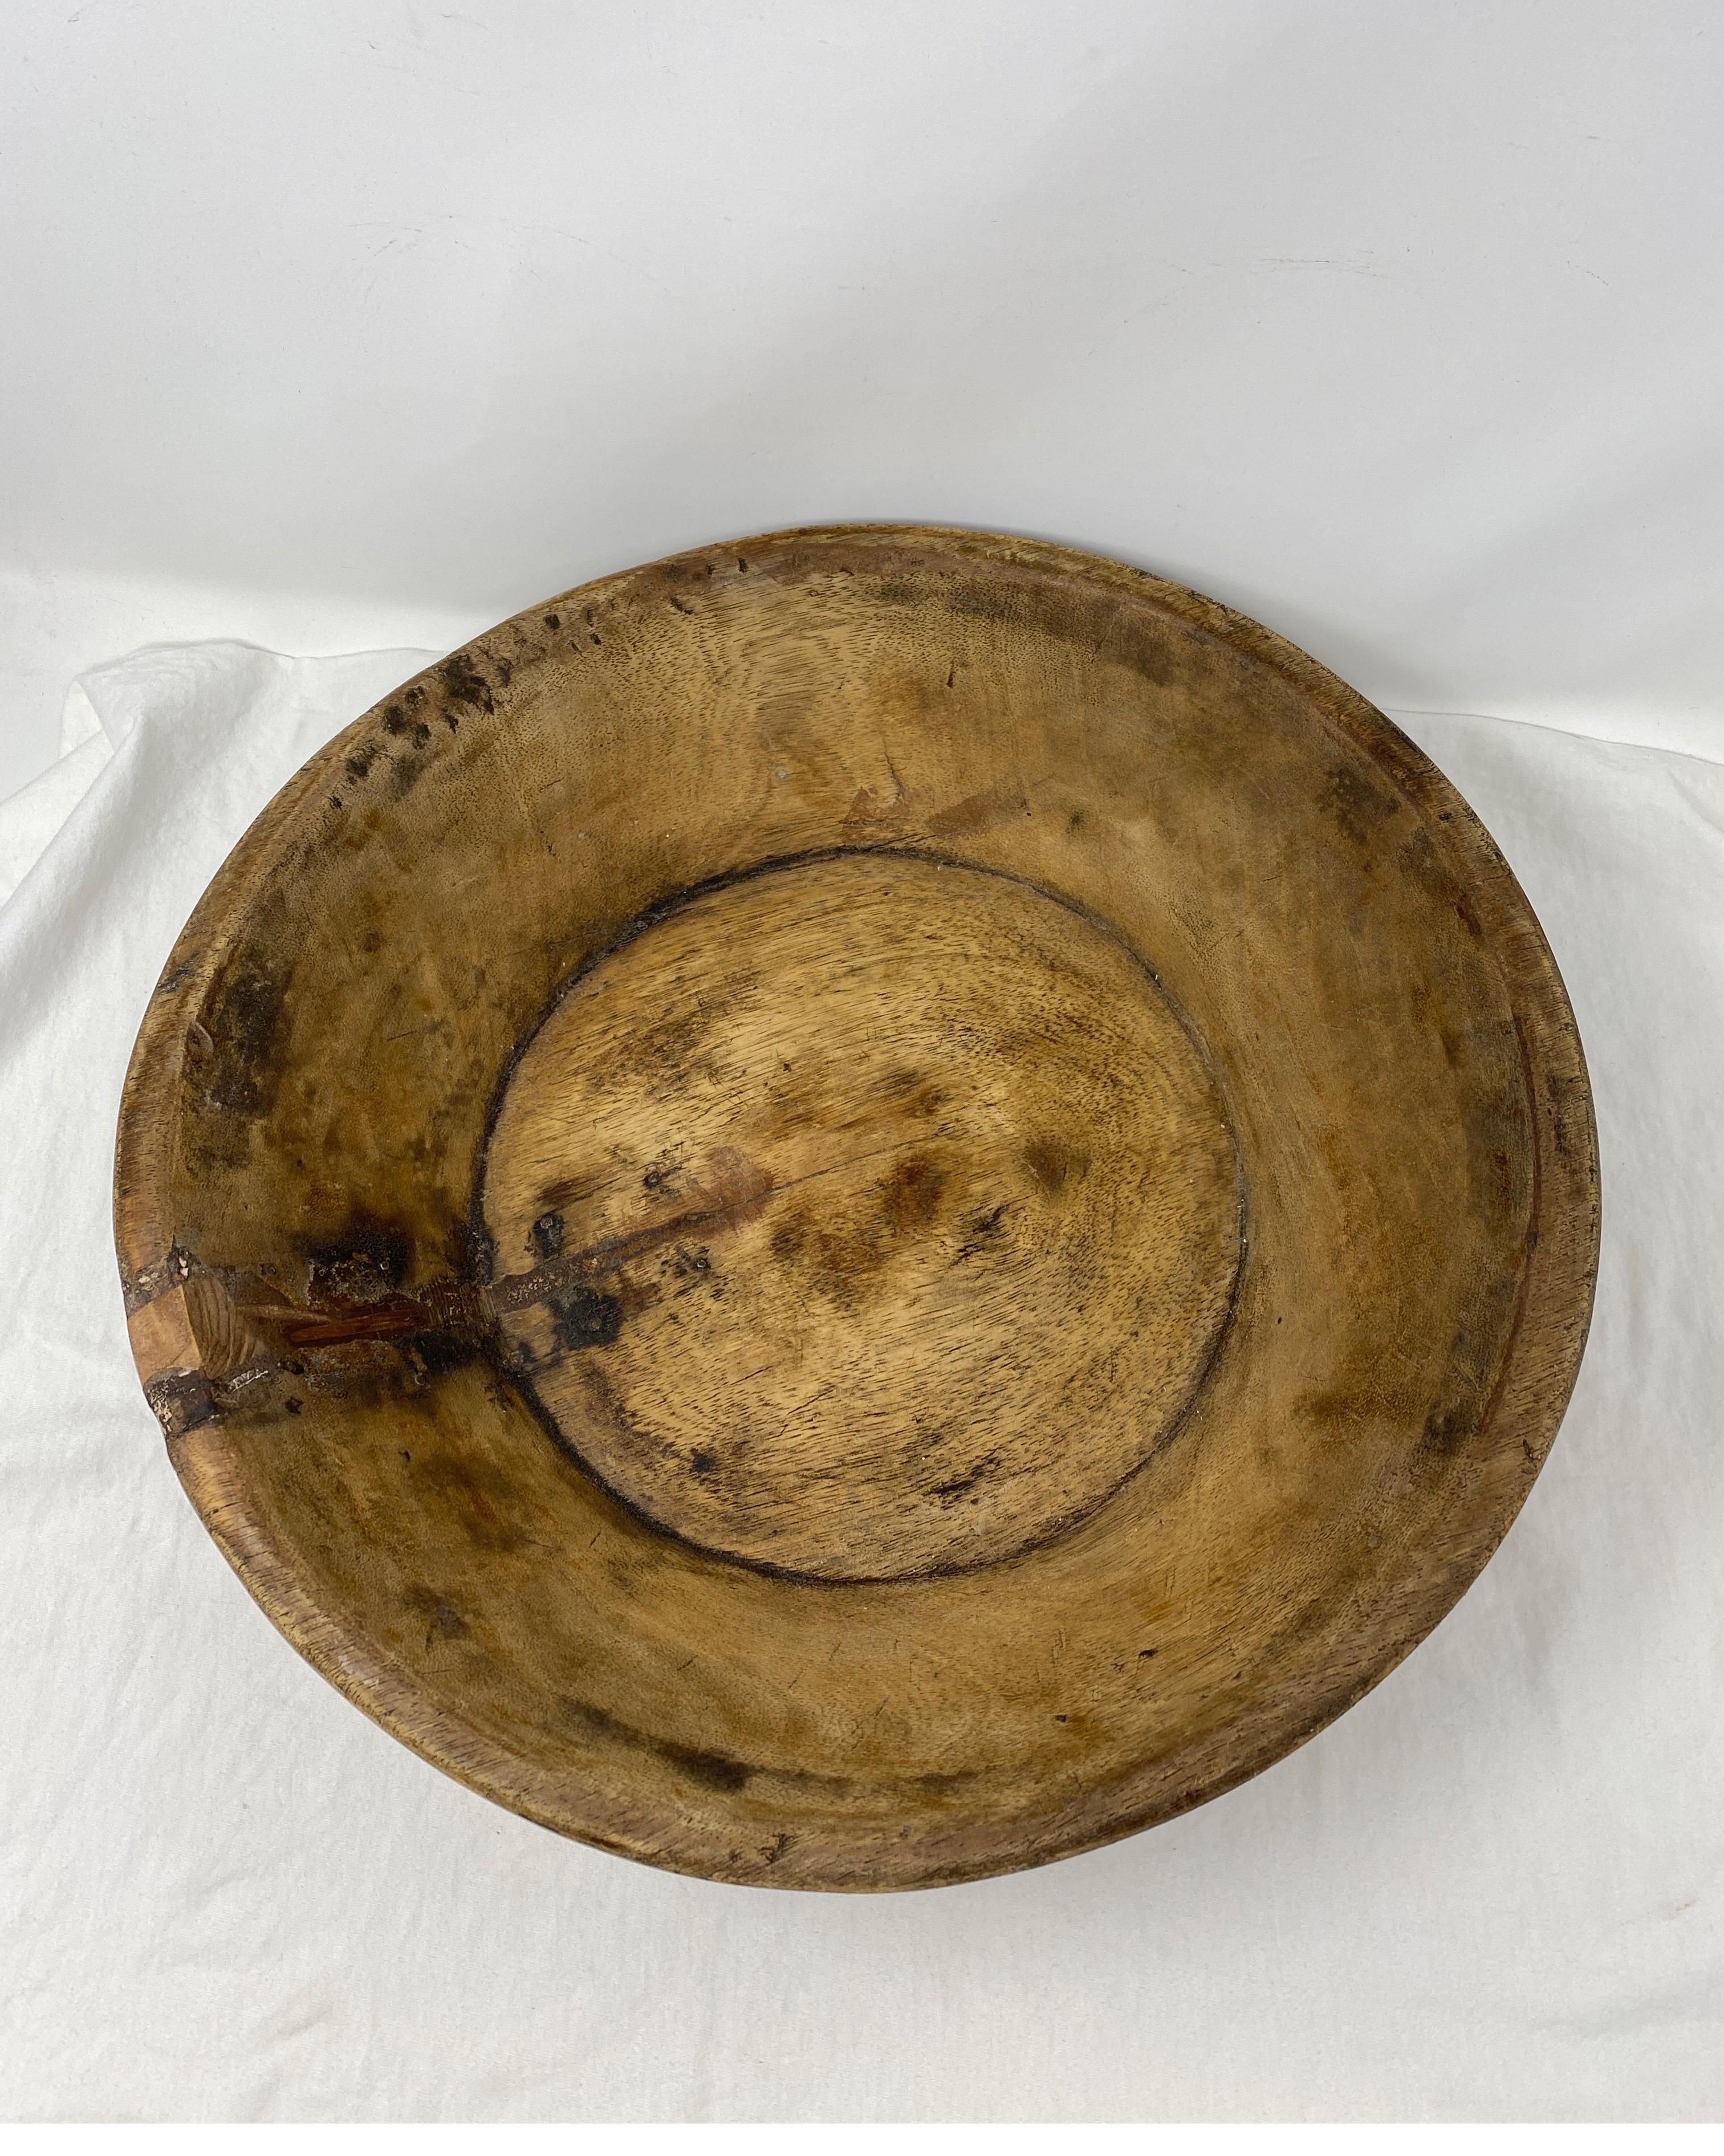 Wooden dough kneading parat bowl original old hand carved hard wood.

A old wooden round bowl originally used for kneading dough in olden times. Hand carved in a nice shape in a single block of hard wood. The bowls are very tactile and can be used